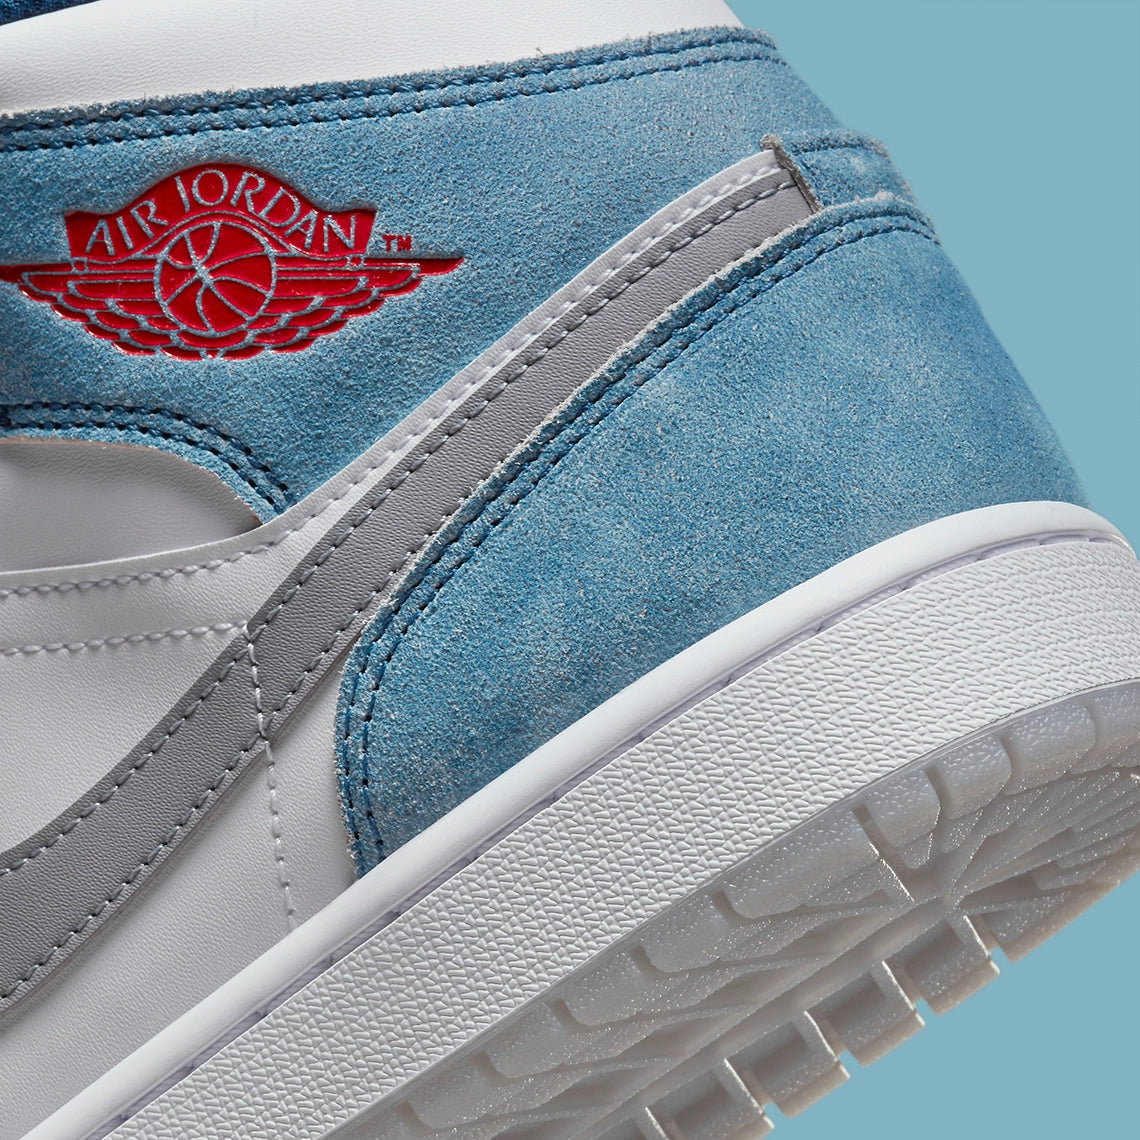 Jordan 1 Mid "French Blue Fire Red"